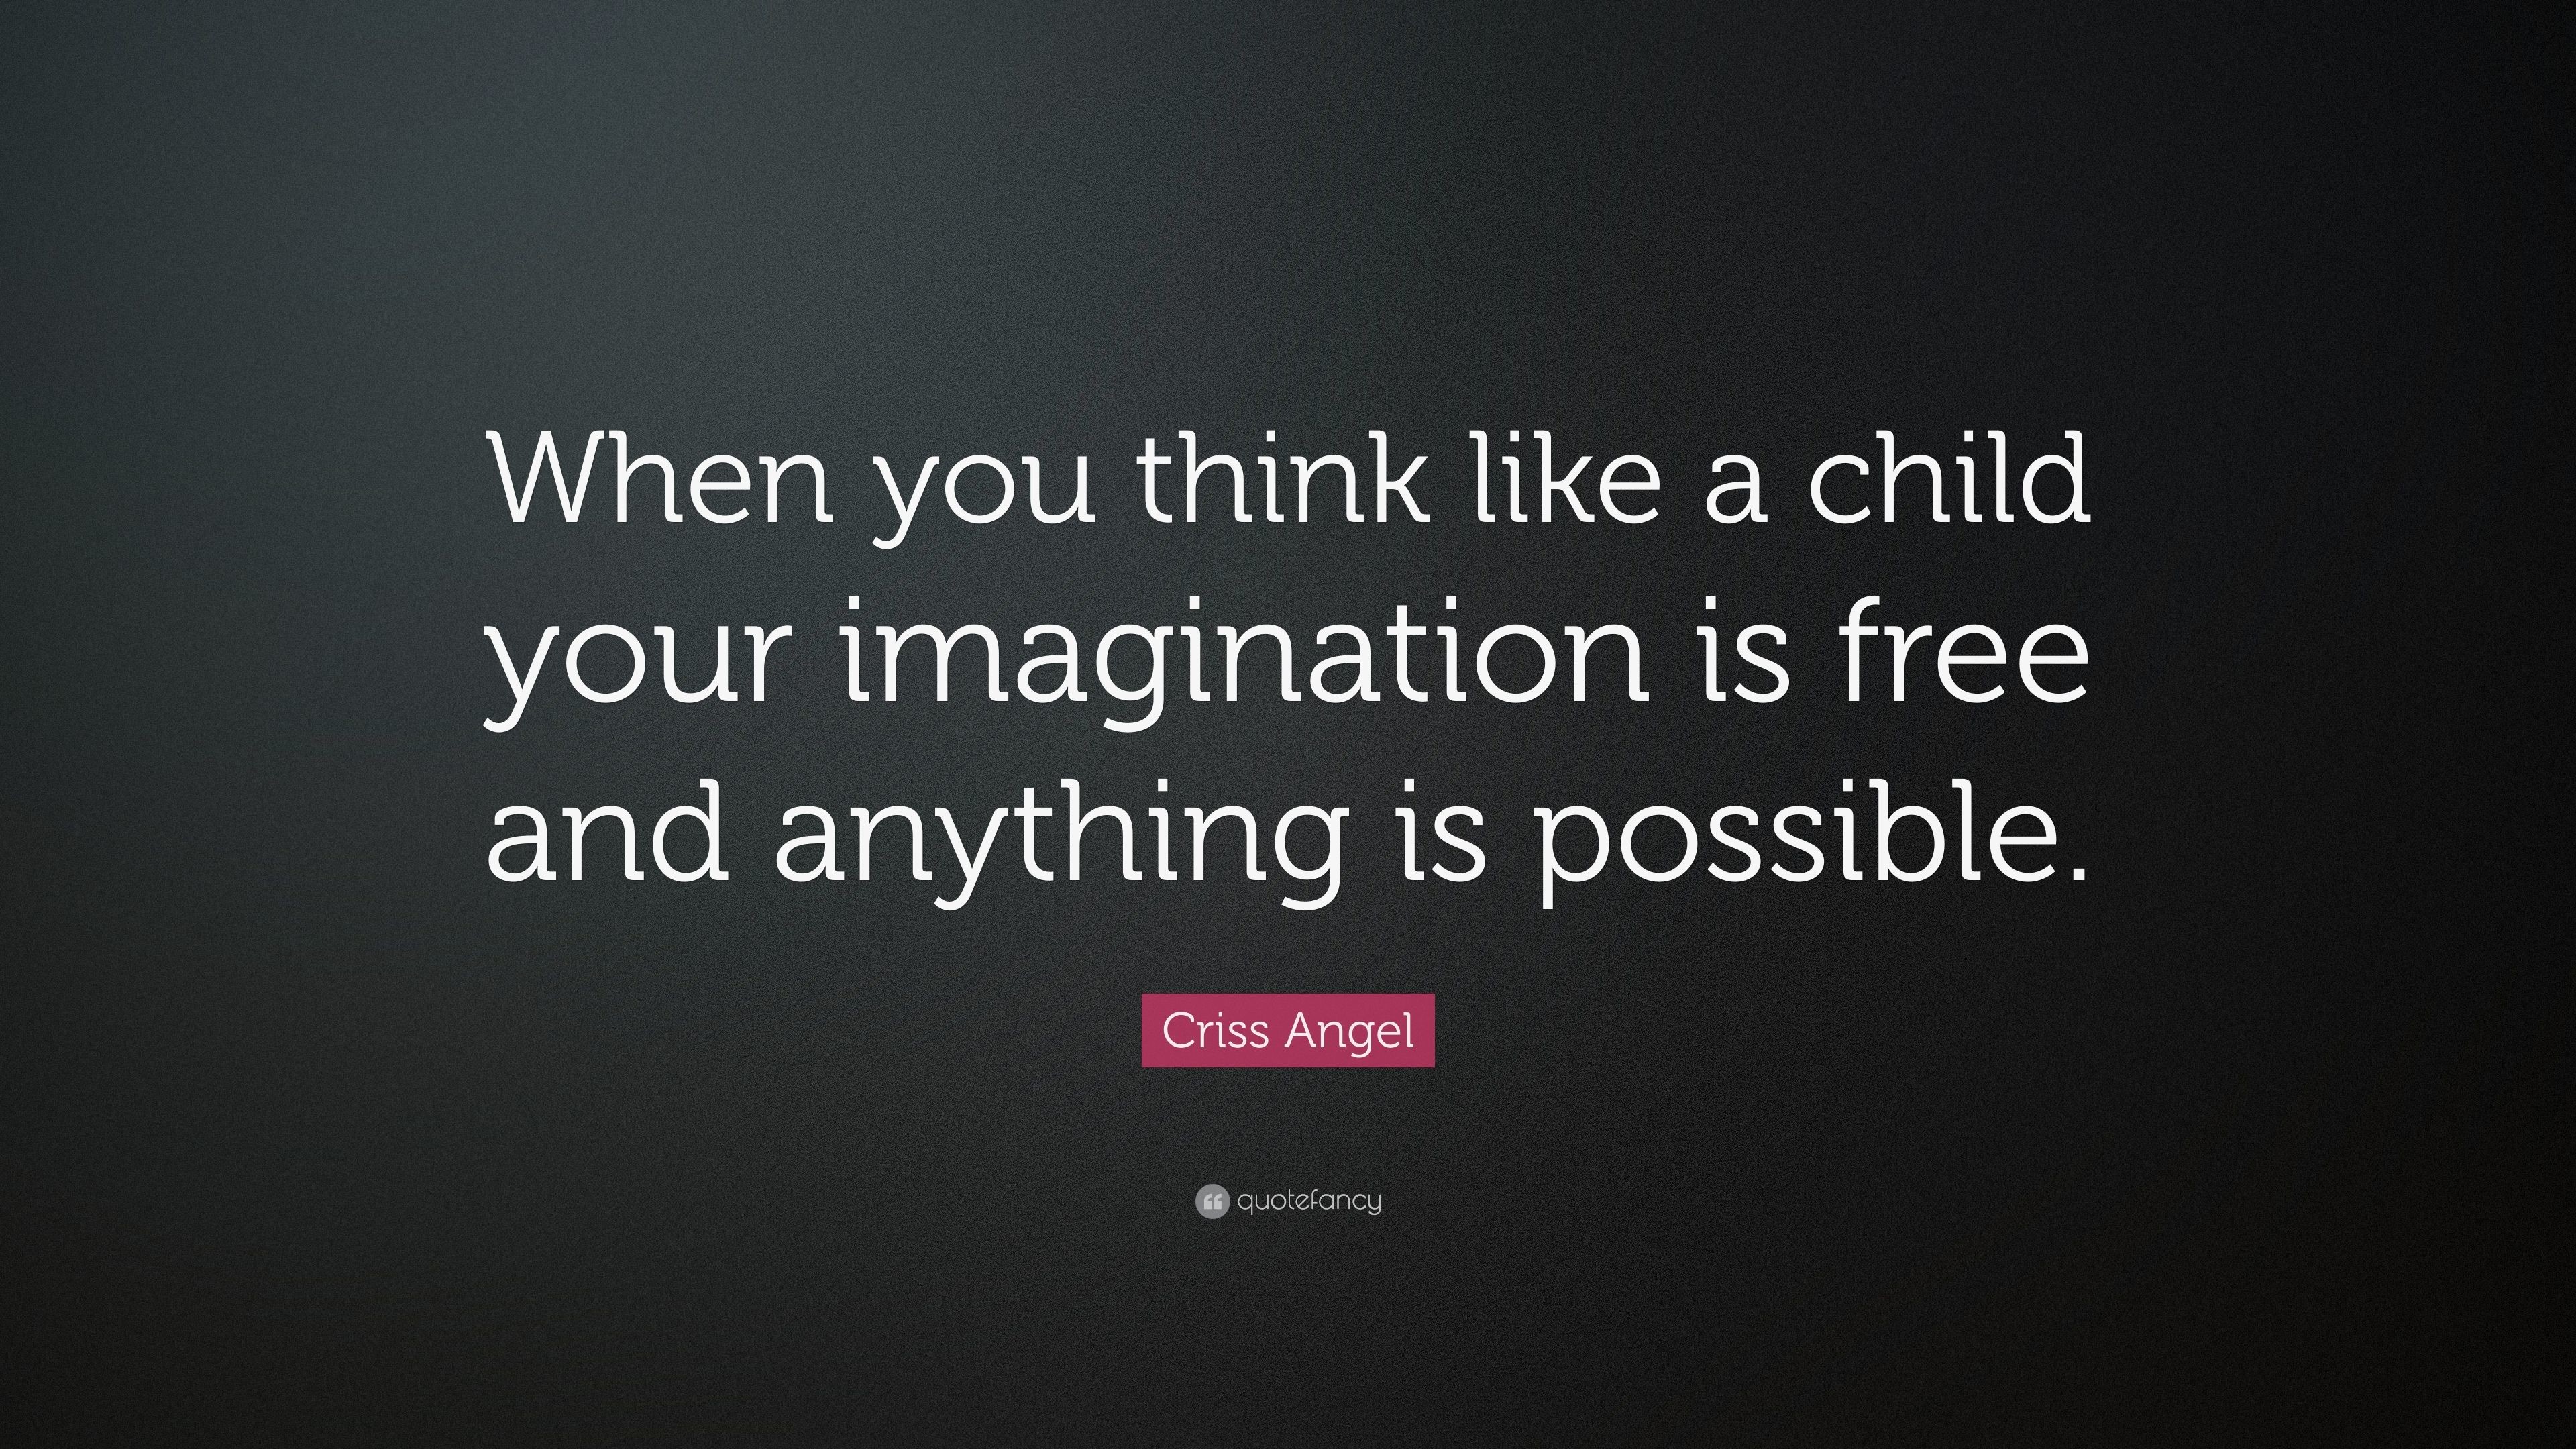 3840x2160 Criss Angel Quote: “When you think like a child your imagination is free and